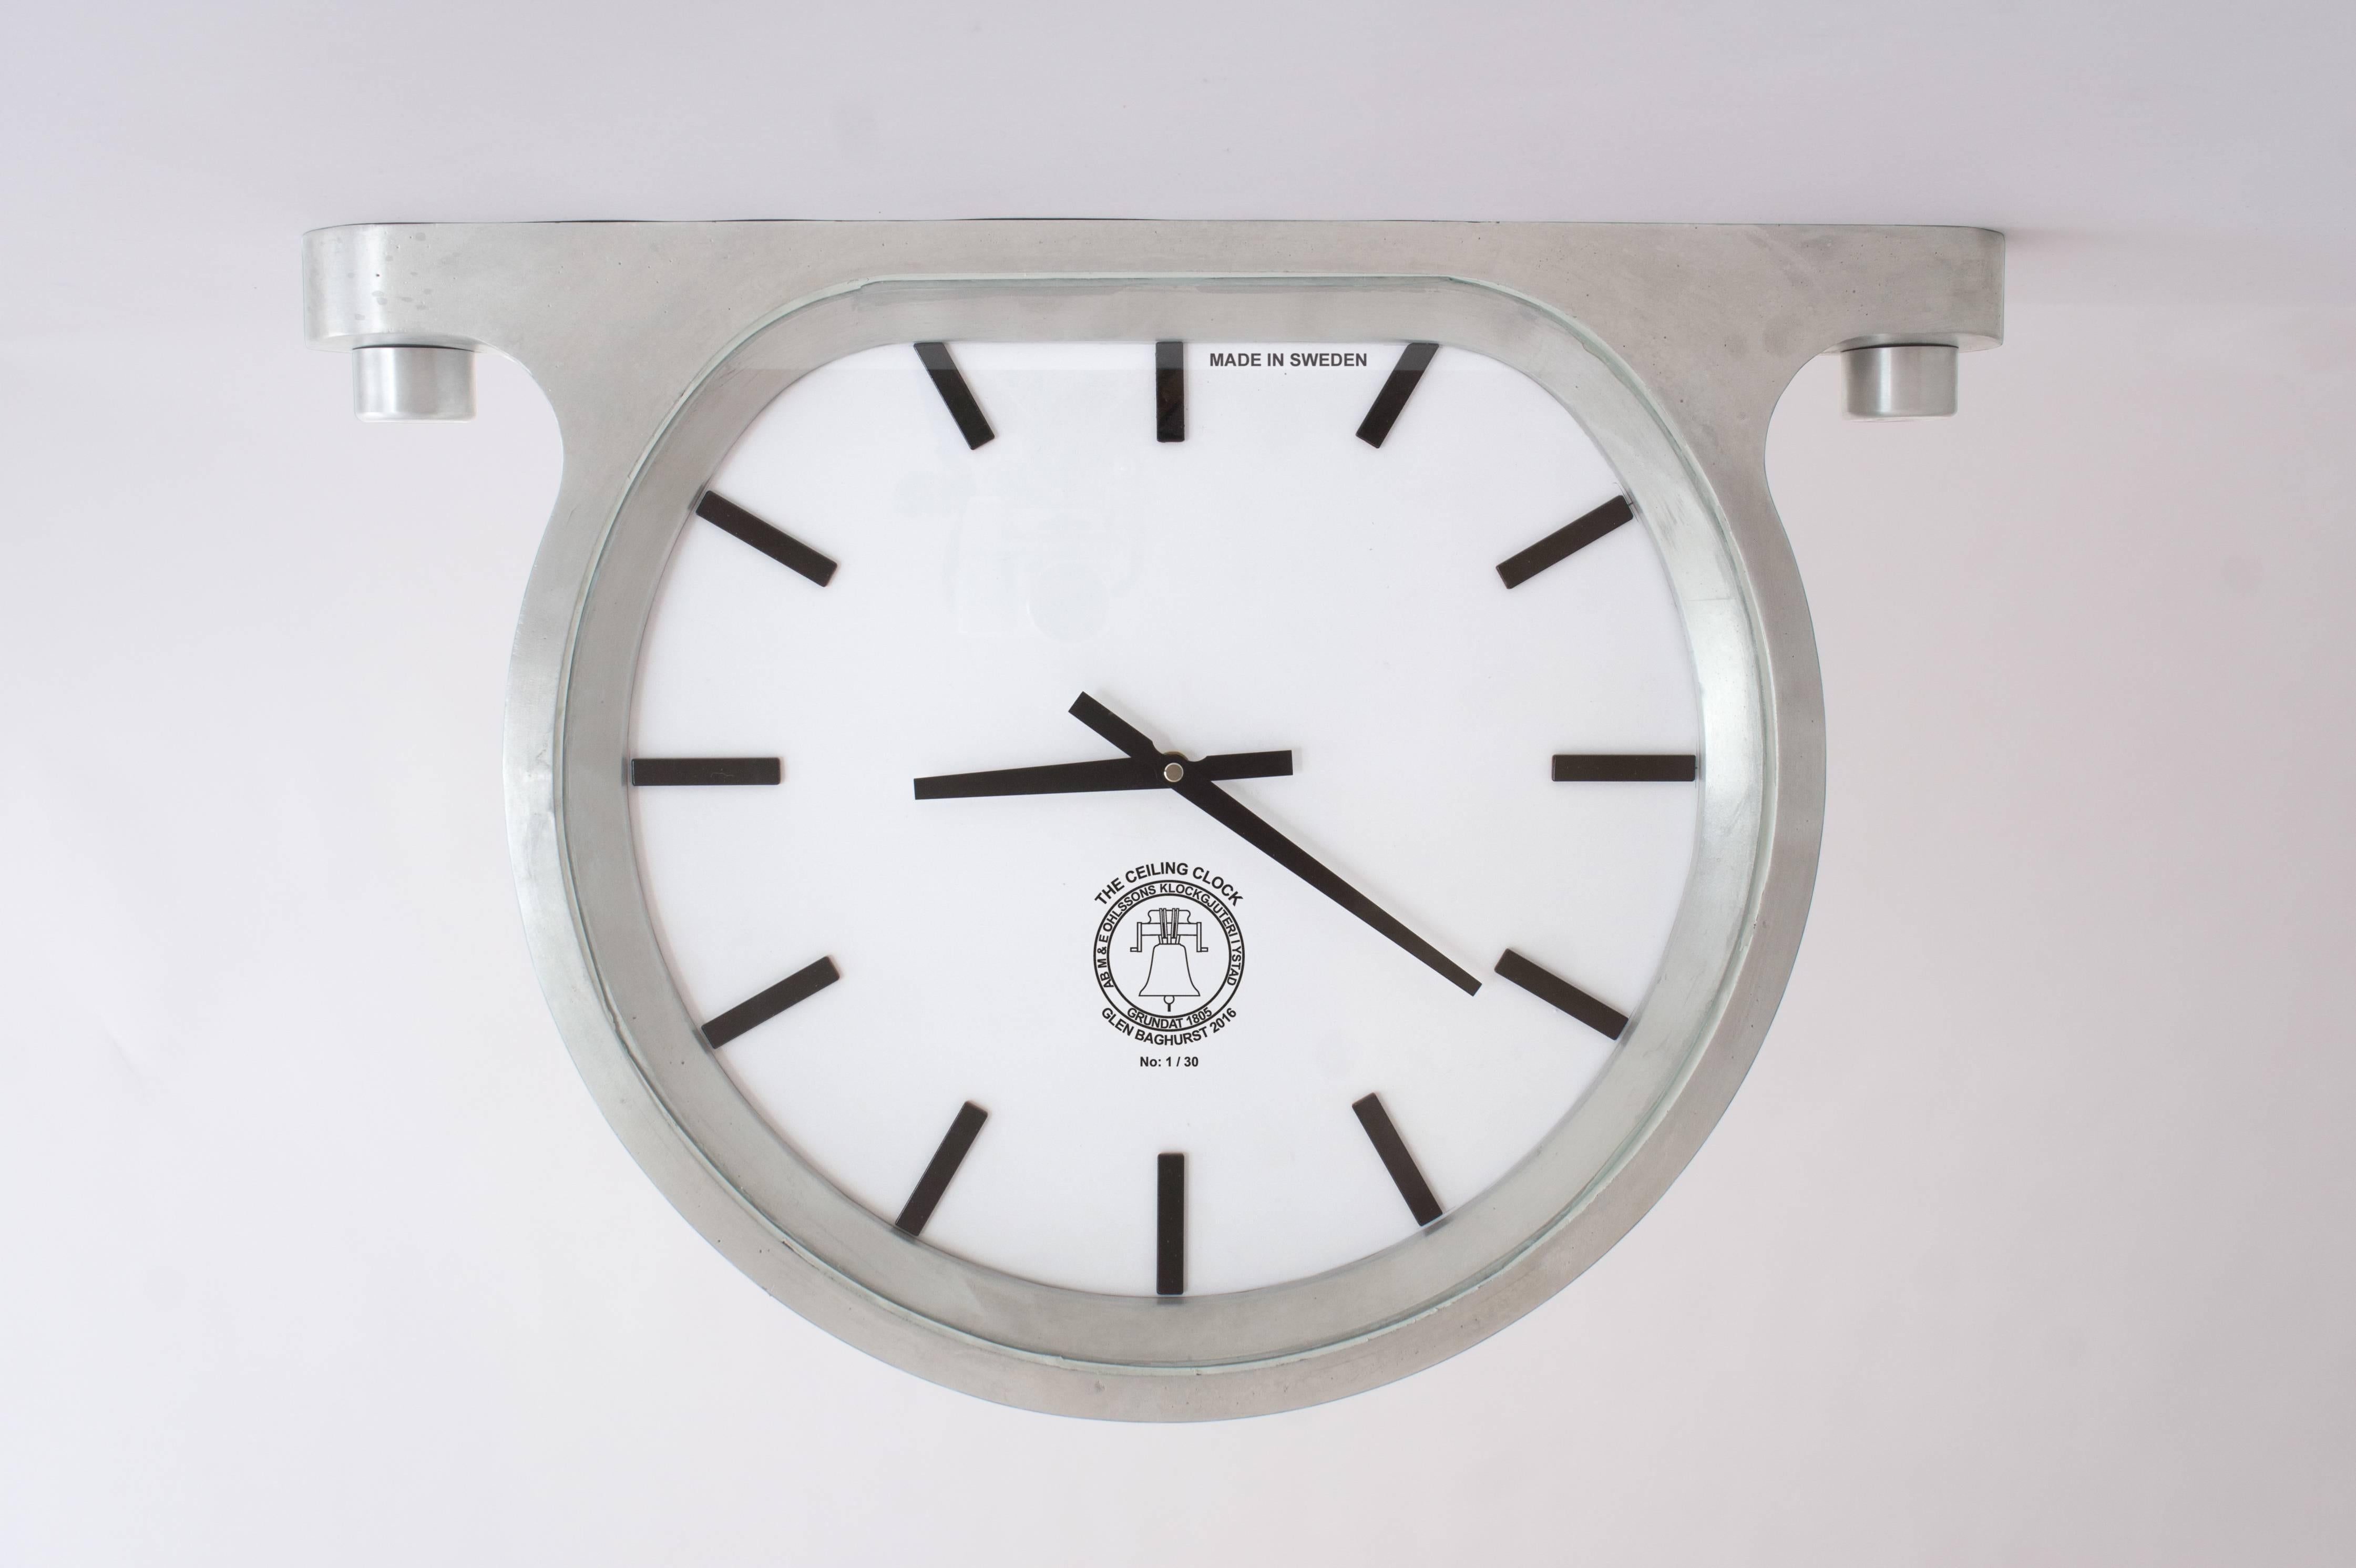 ‘The Ceiling Clock’ is a timepiece that can be attached to the wall, ceiling or sitting on a mantel. Inspired by his father's wristwatch collection Glen Baghurst has designed the casing of the clock like a wristwatch with large obvious mounts either